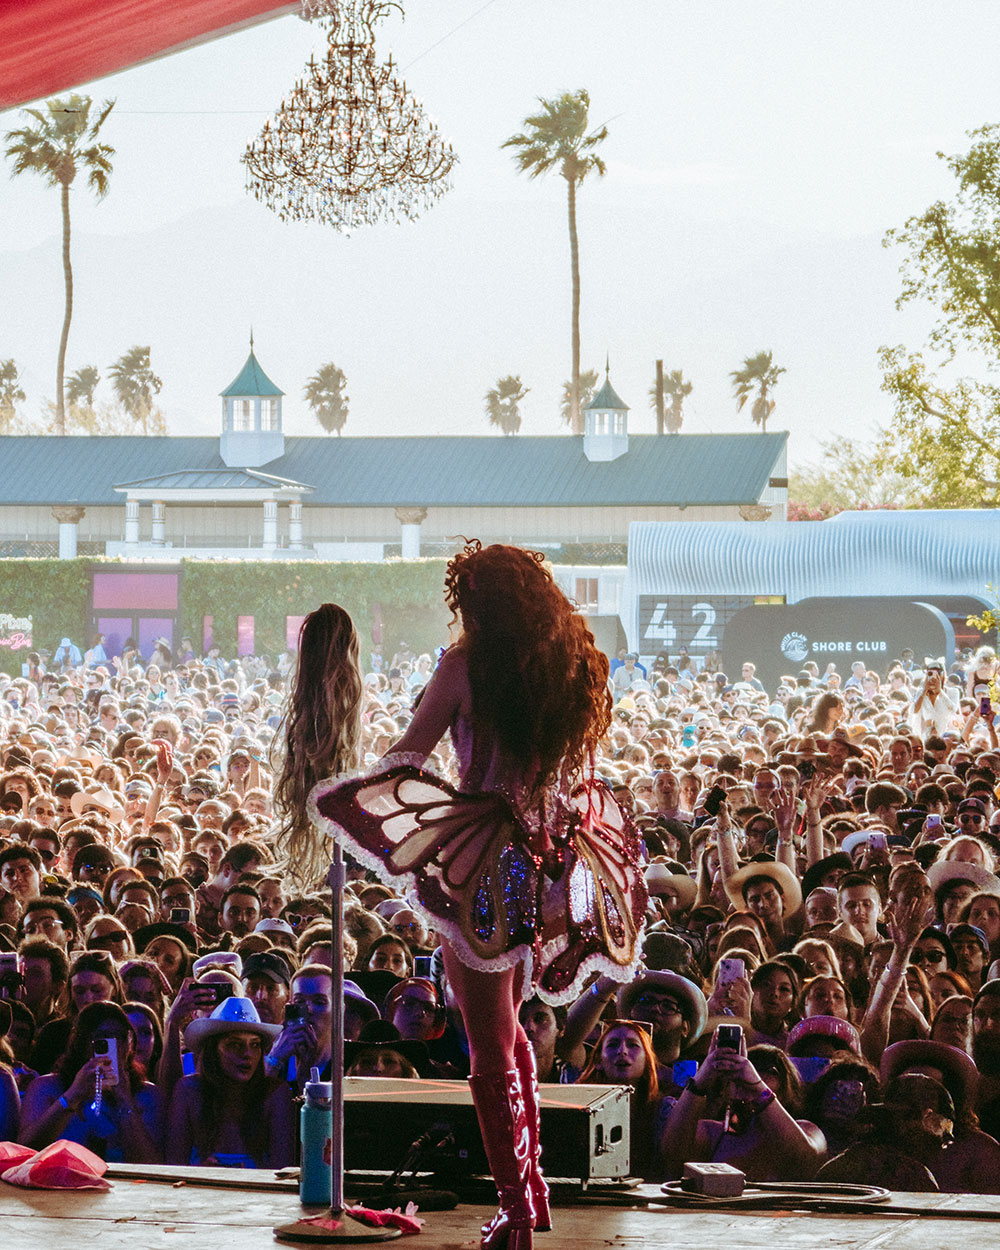 Coachella performer in front of crowd taken from backstage